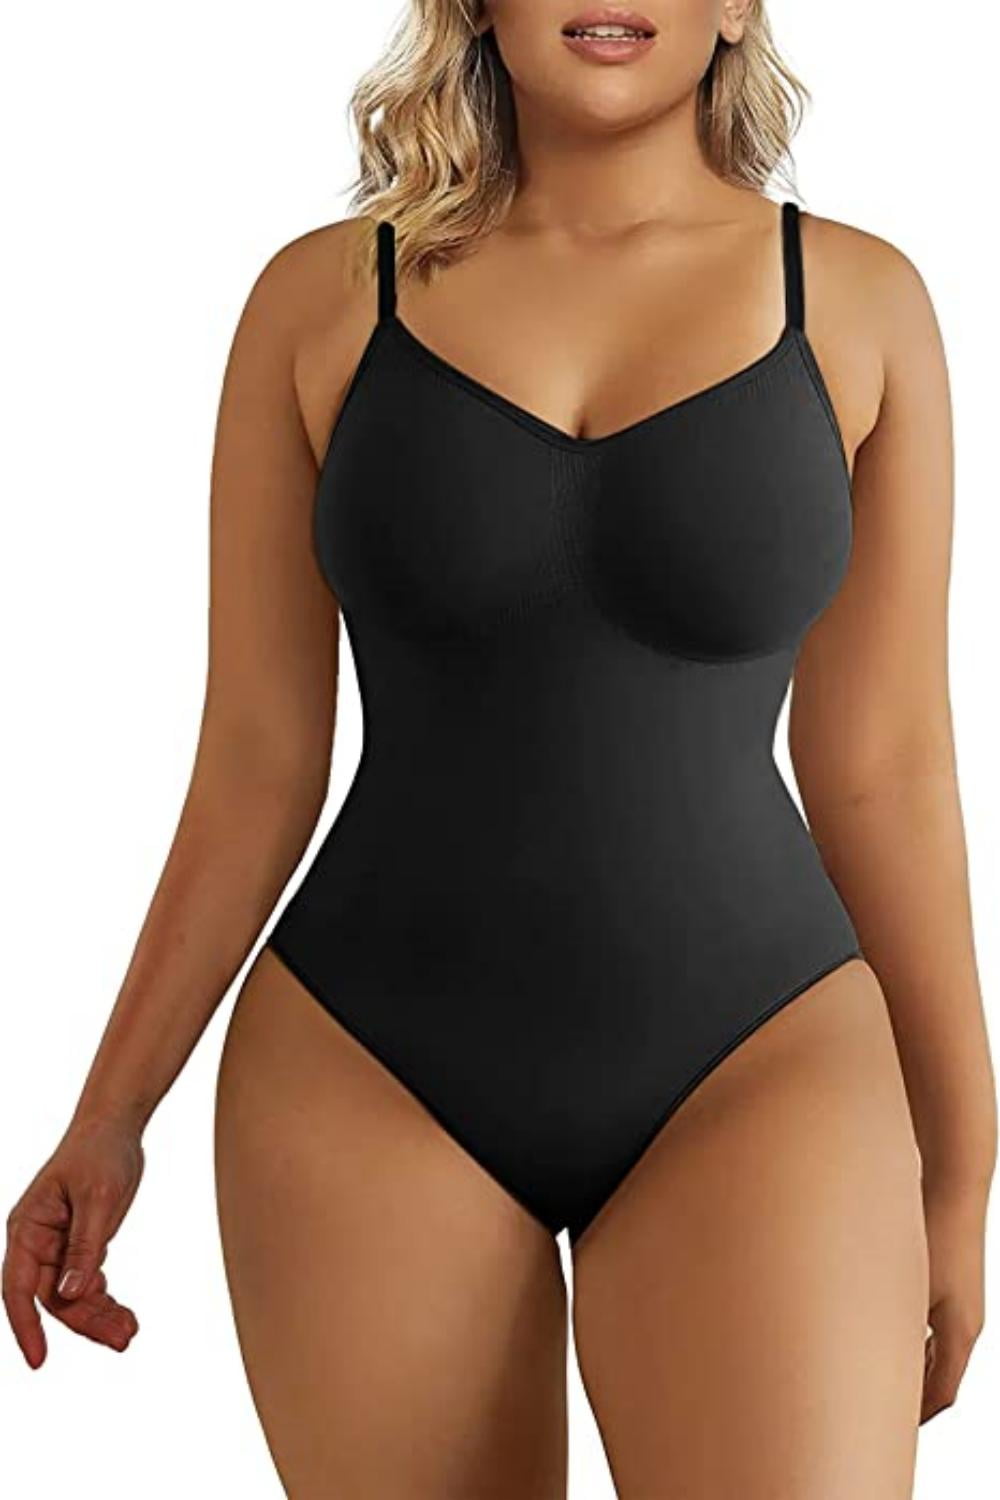 Bodysuit For Women Seamless Full Body Suits Shapewear Tummy Control I  Sleeveless Body Shaper Sculpting Tank Tops Dupes